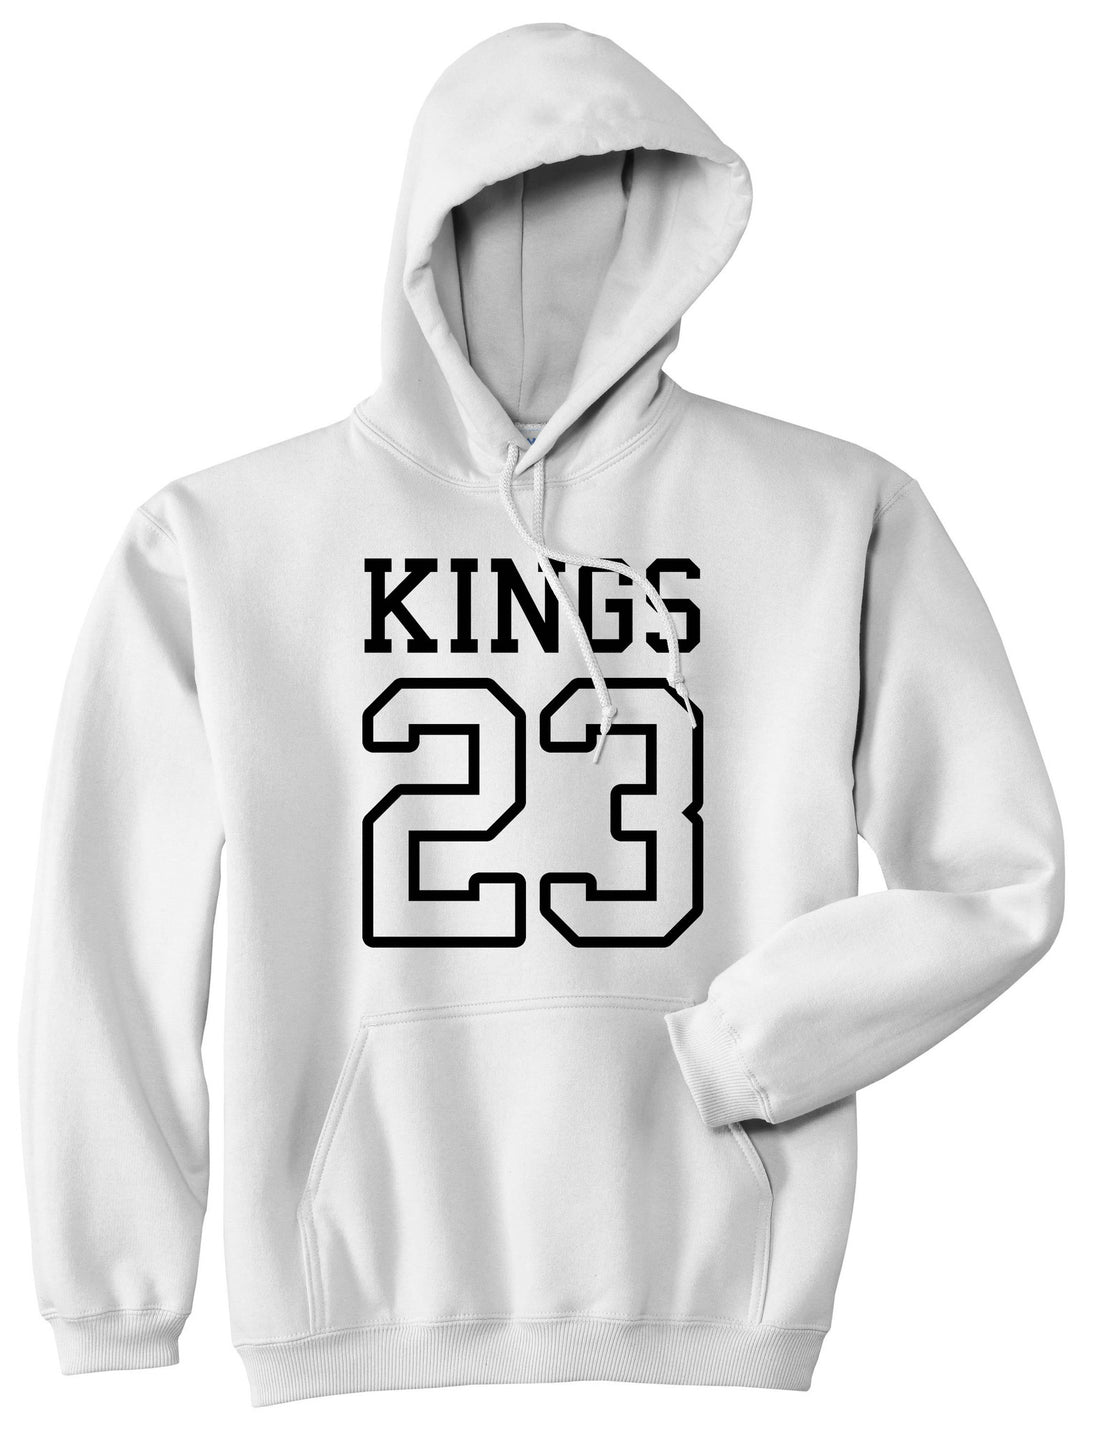 KINGS 23 Jersey Pullover Hoodie in White By Kings Of NY